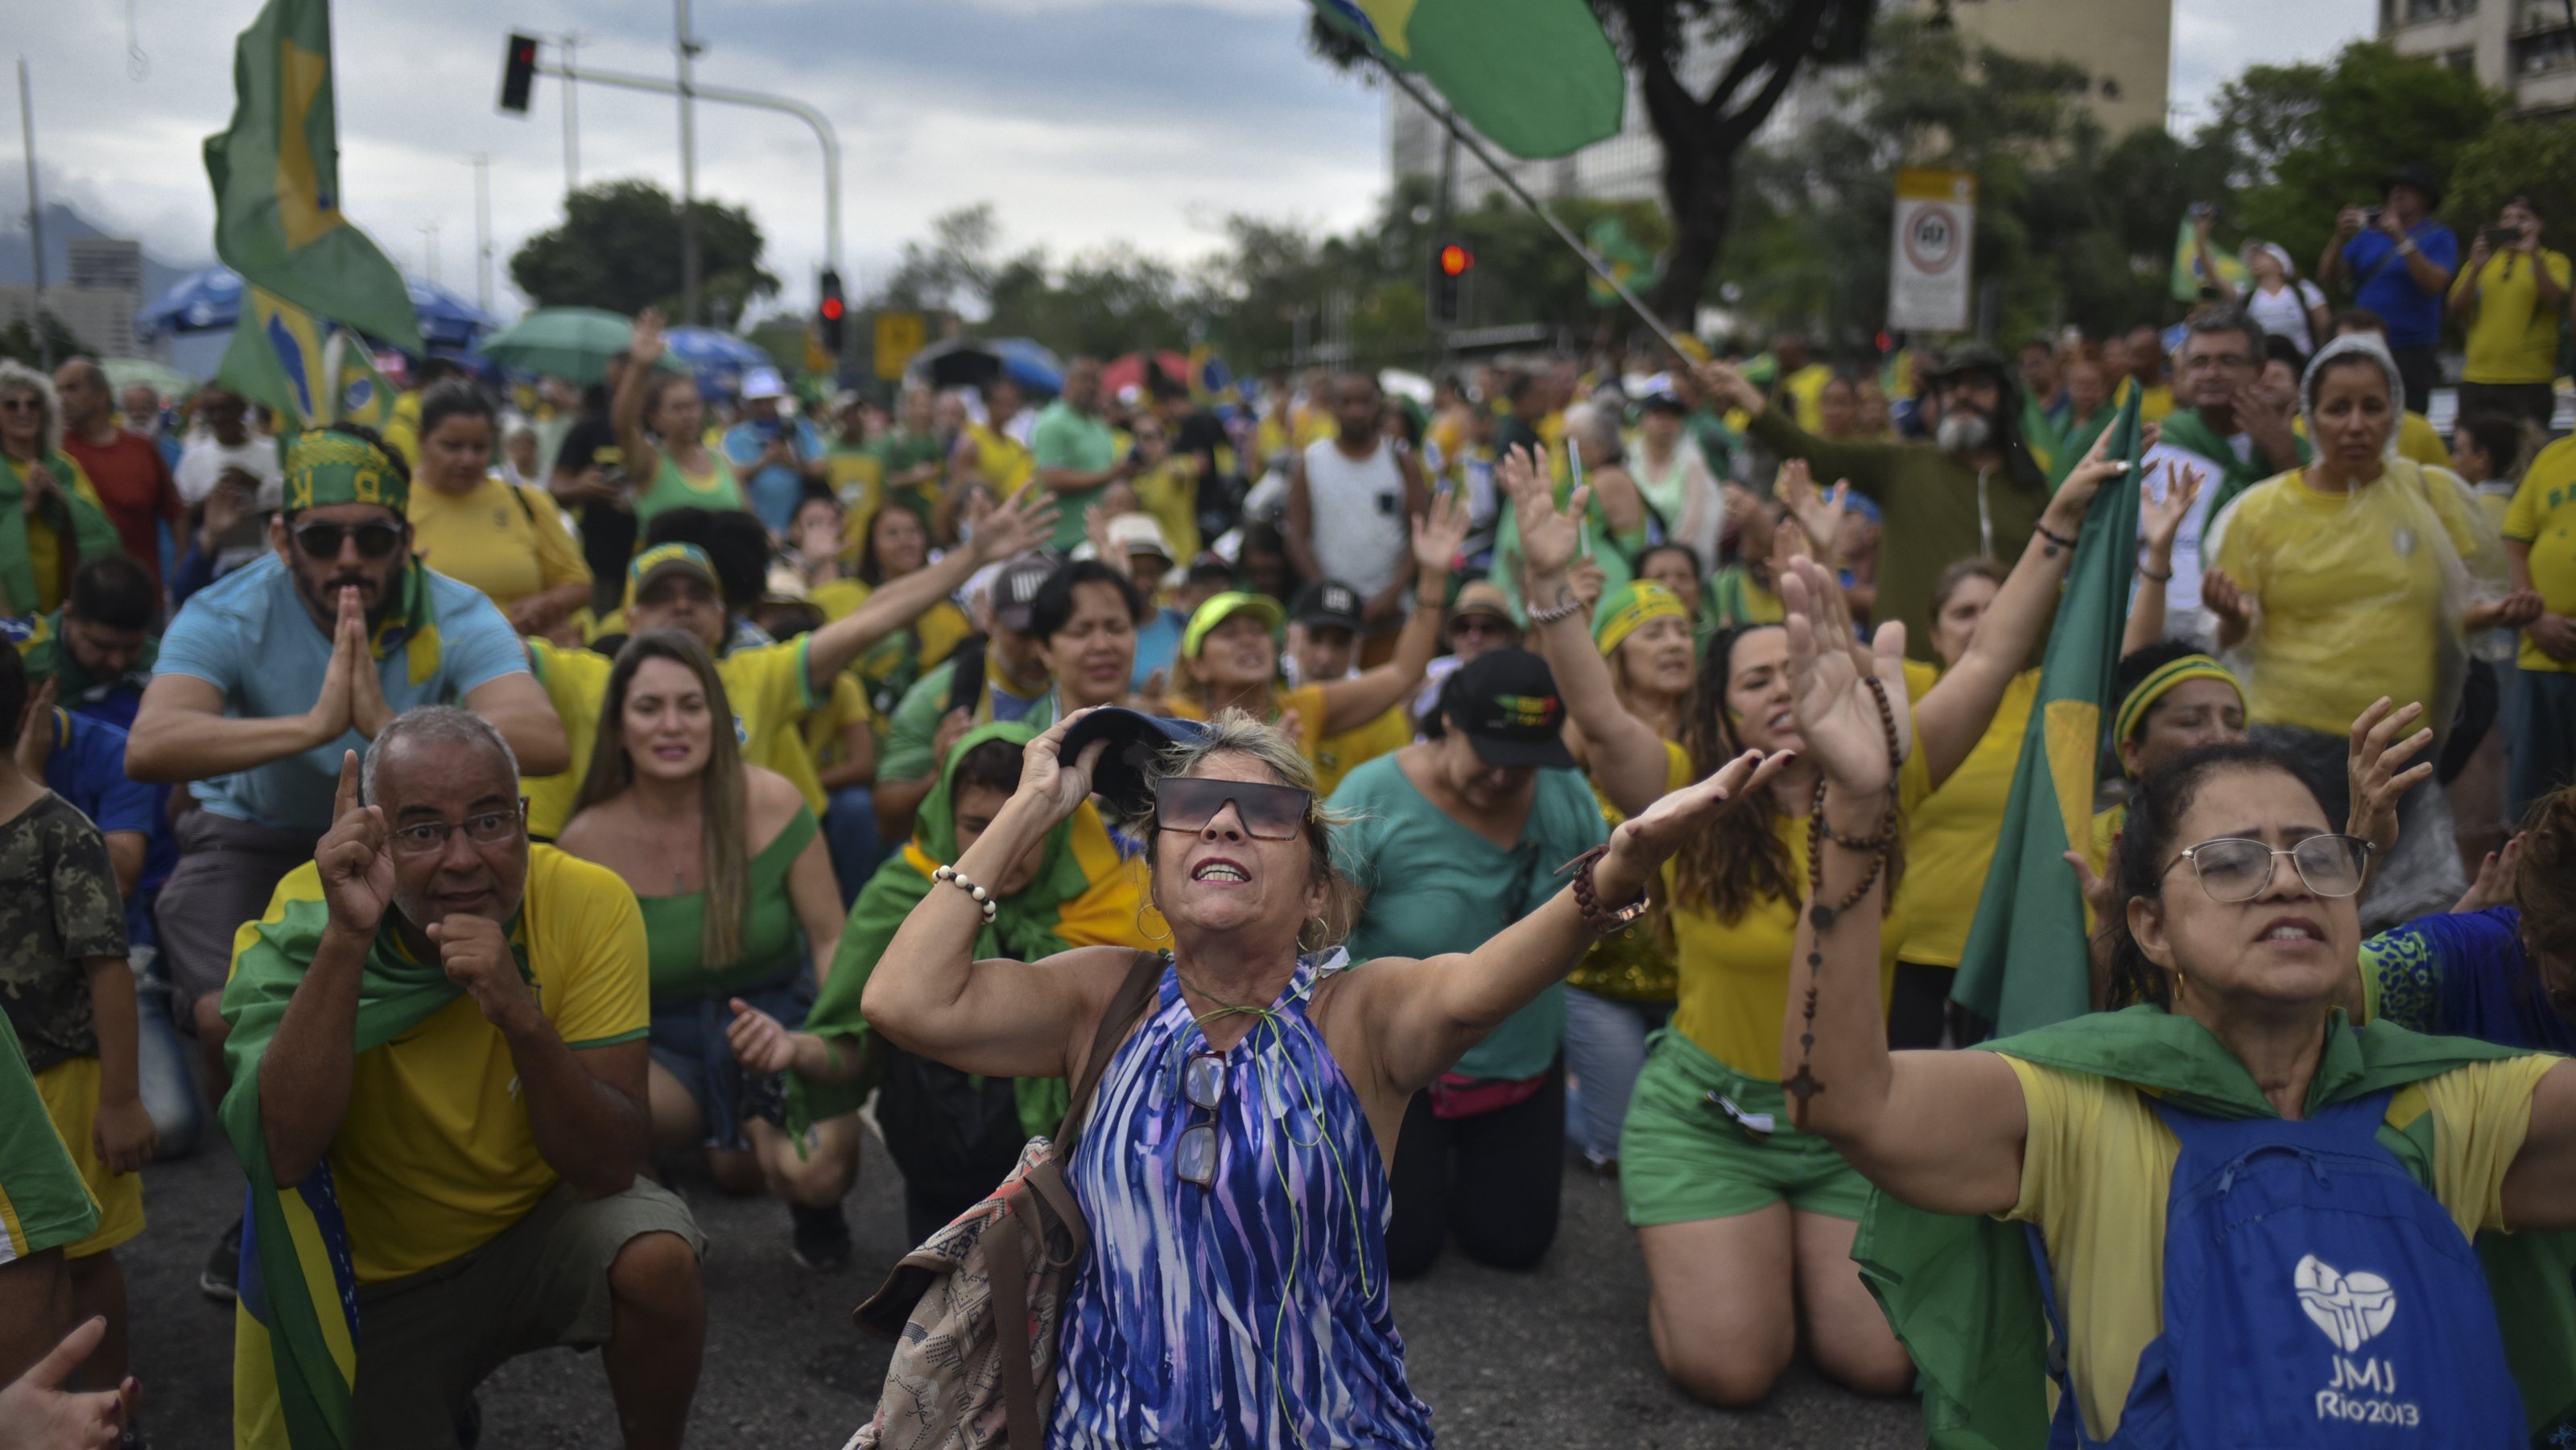 Demonstration against the results of the runoff election in Brazil